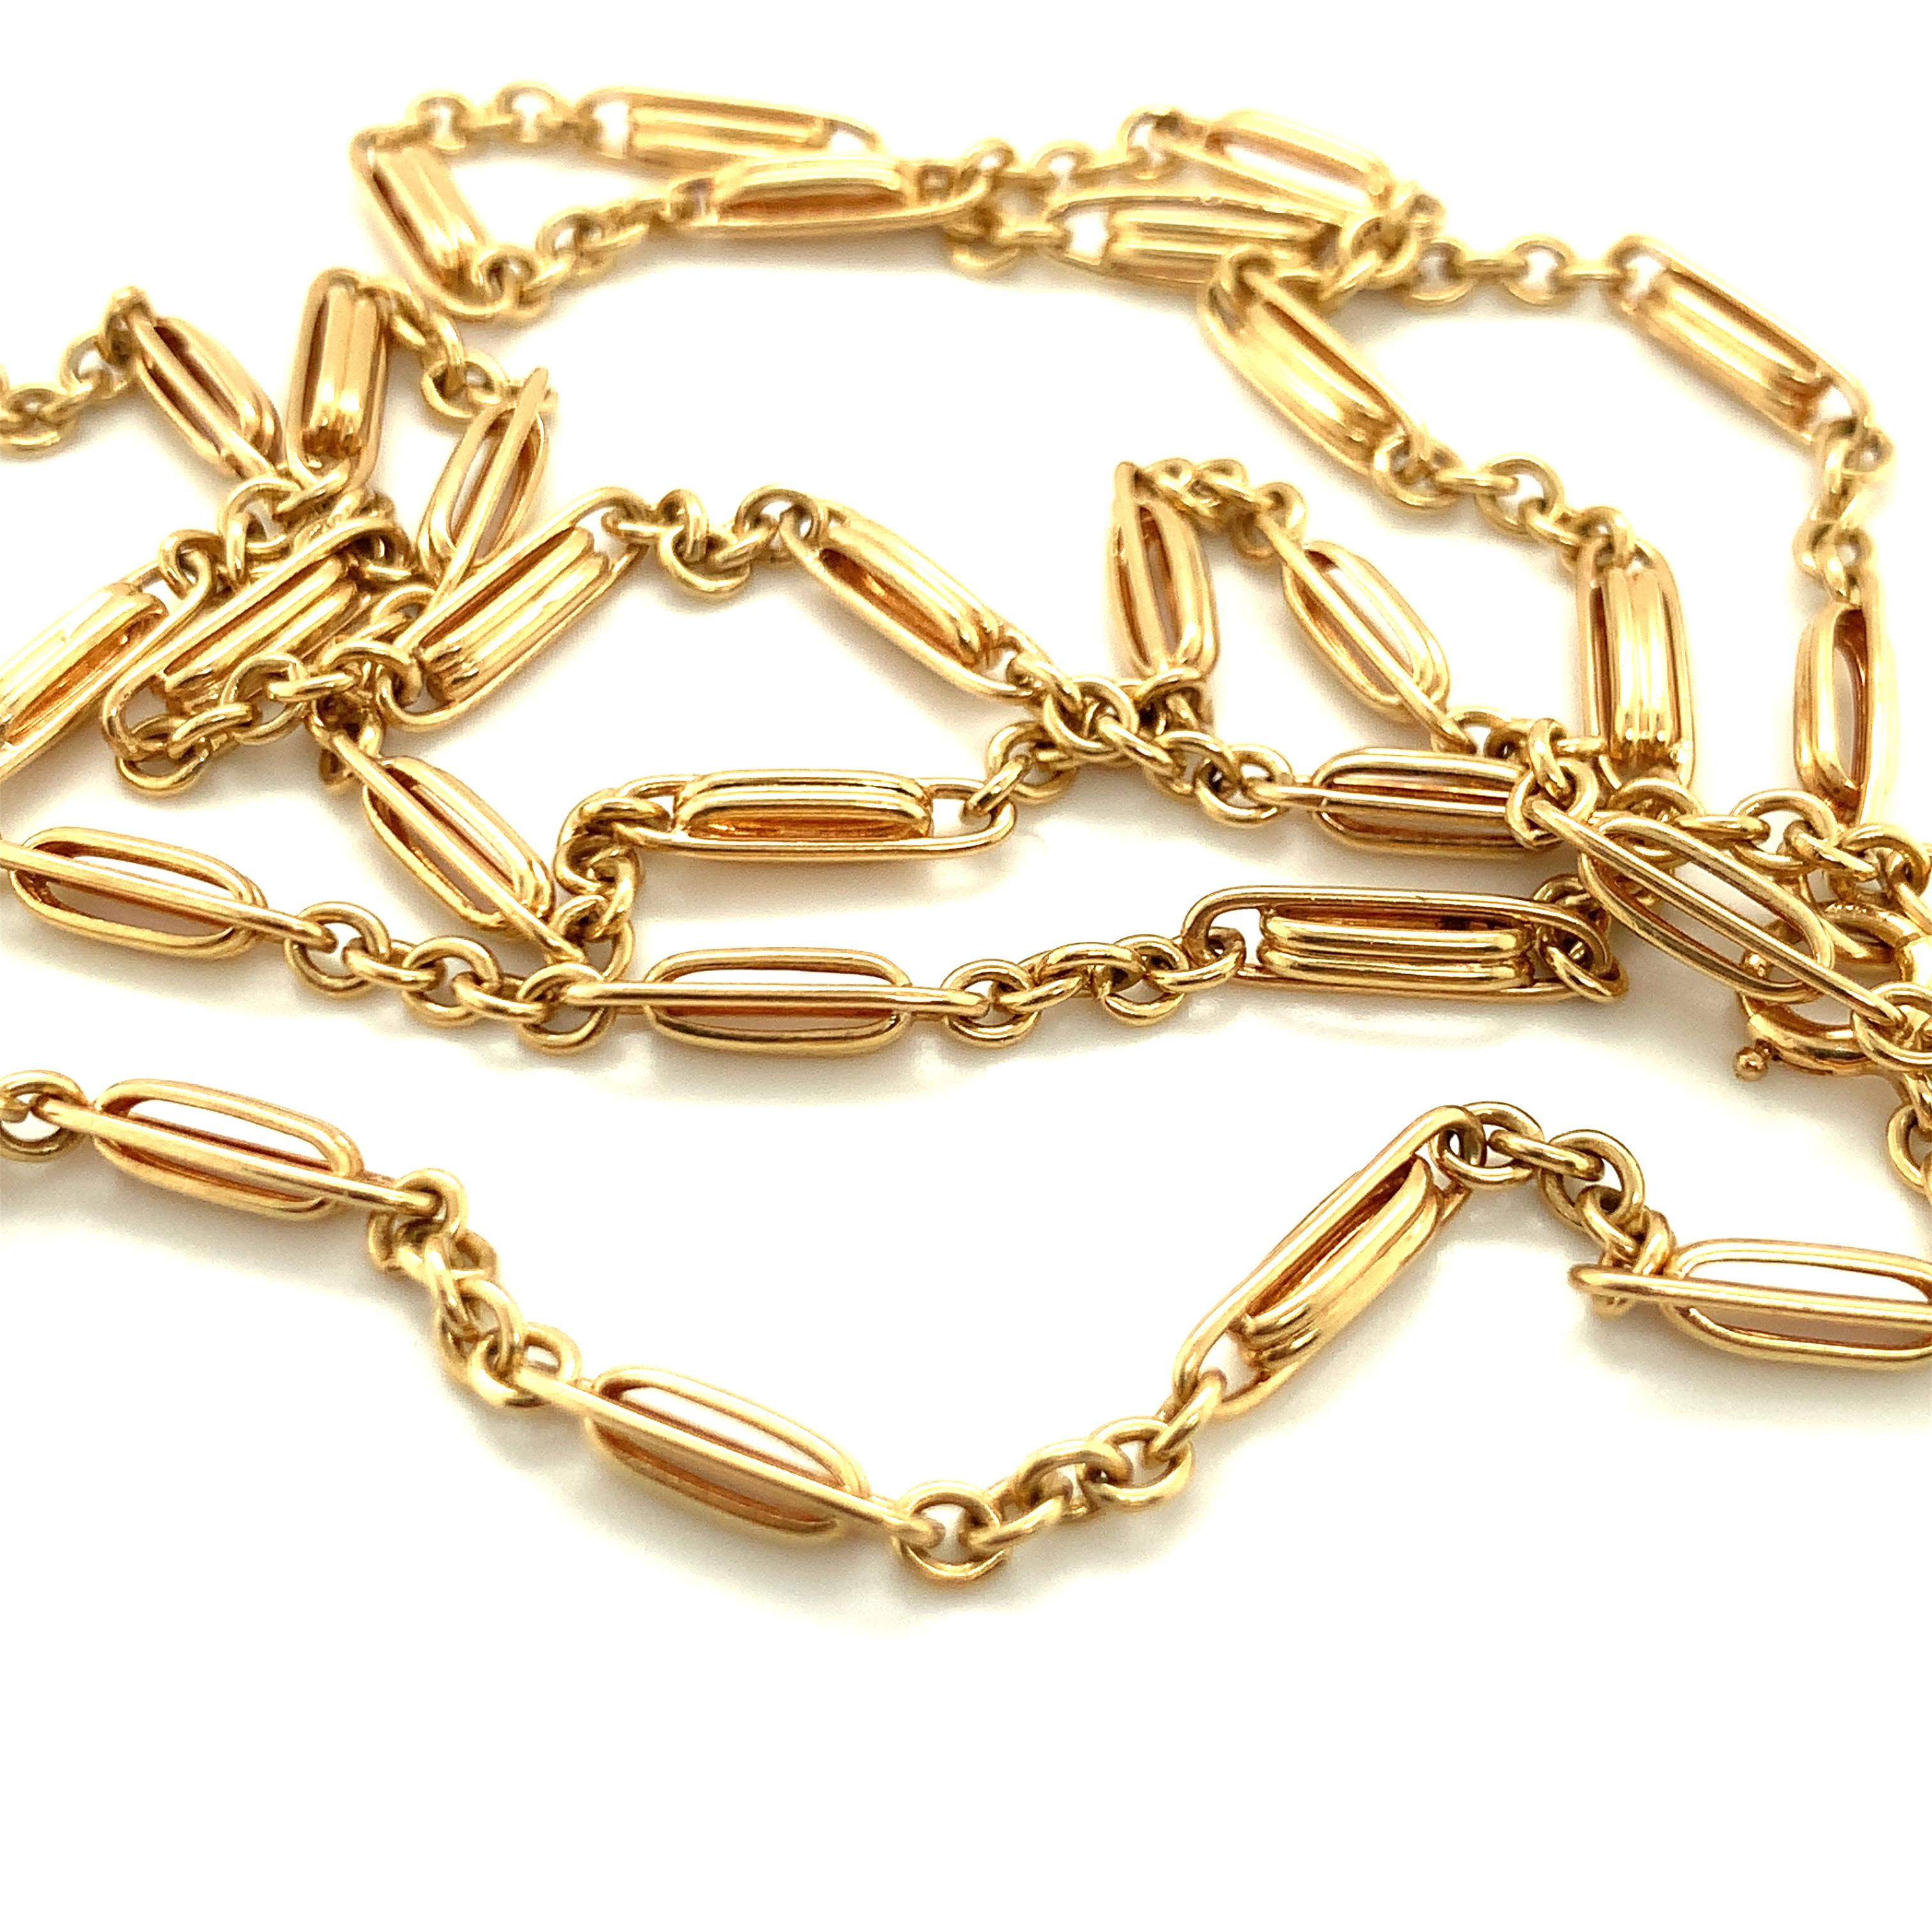 One 14K yellow gold Victorian fancy link antique chain necklace measuring 30 inches long and weighing 19 grams.  Measures 3 mm. wide.

Exquisite, intricate, distinctive.

Metal: 14K yellow gold
Circa: 1900, Victorian
Stamp/Hallmark: